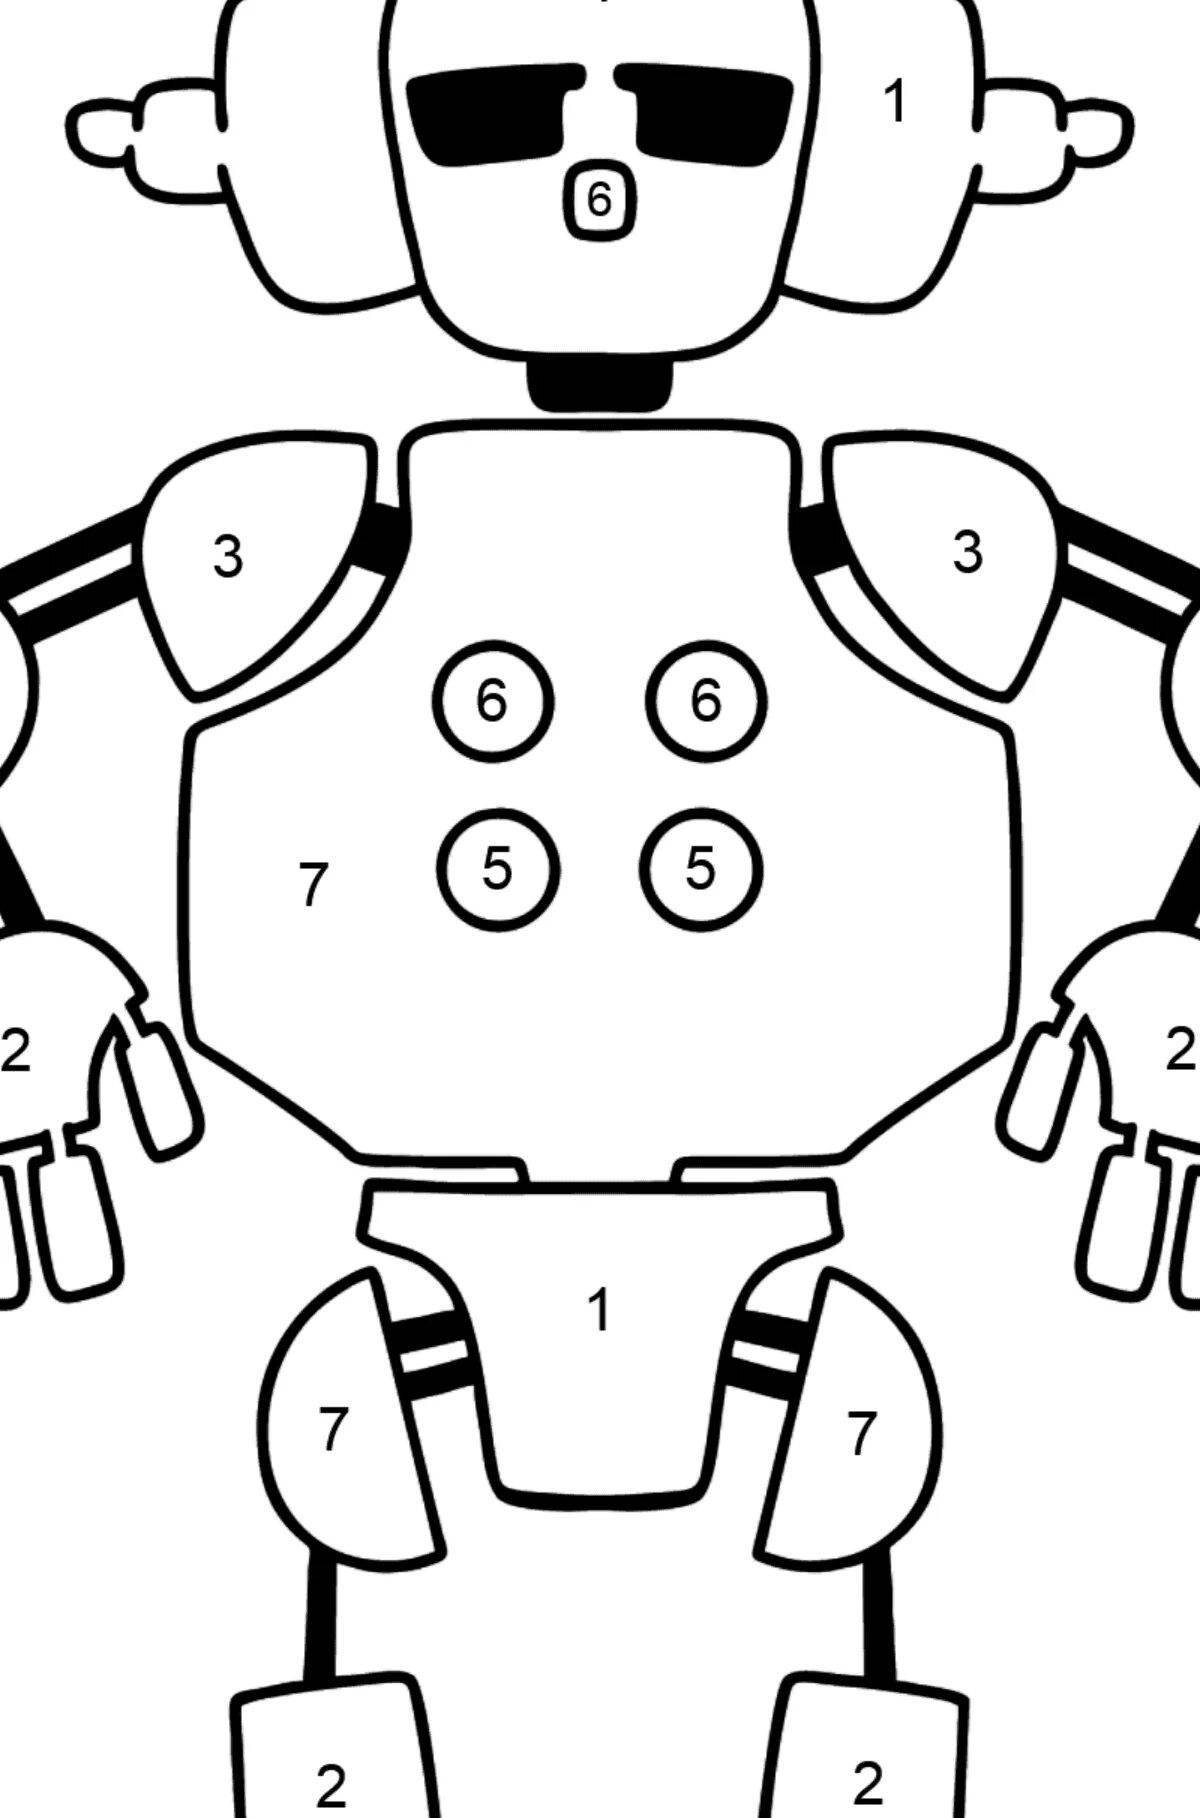 Robot by numbers #14